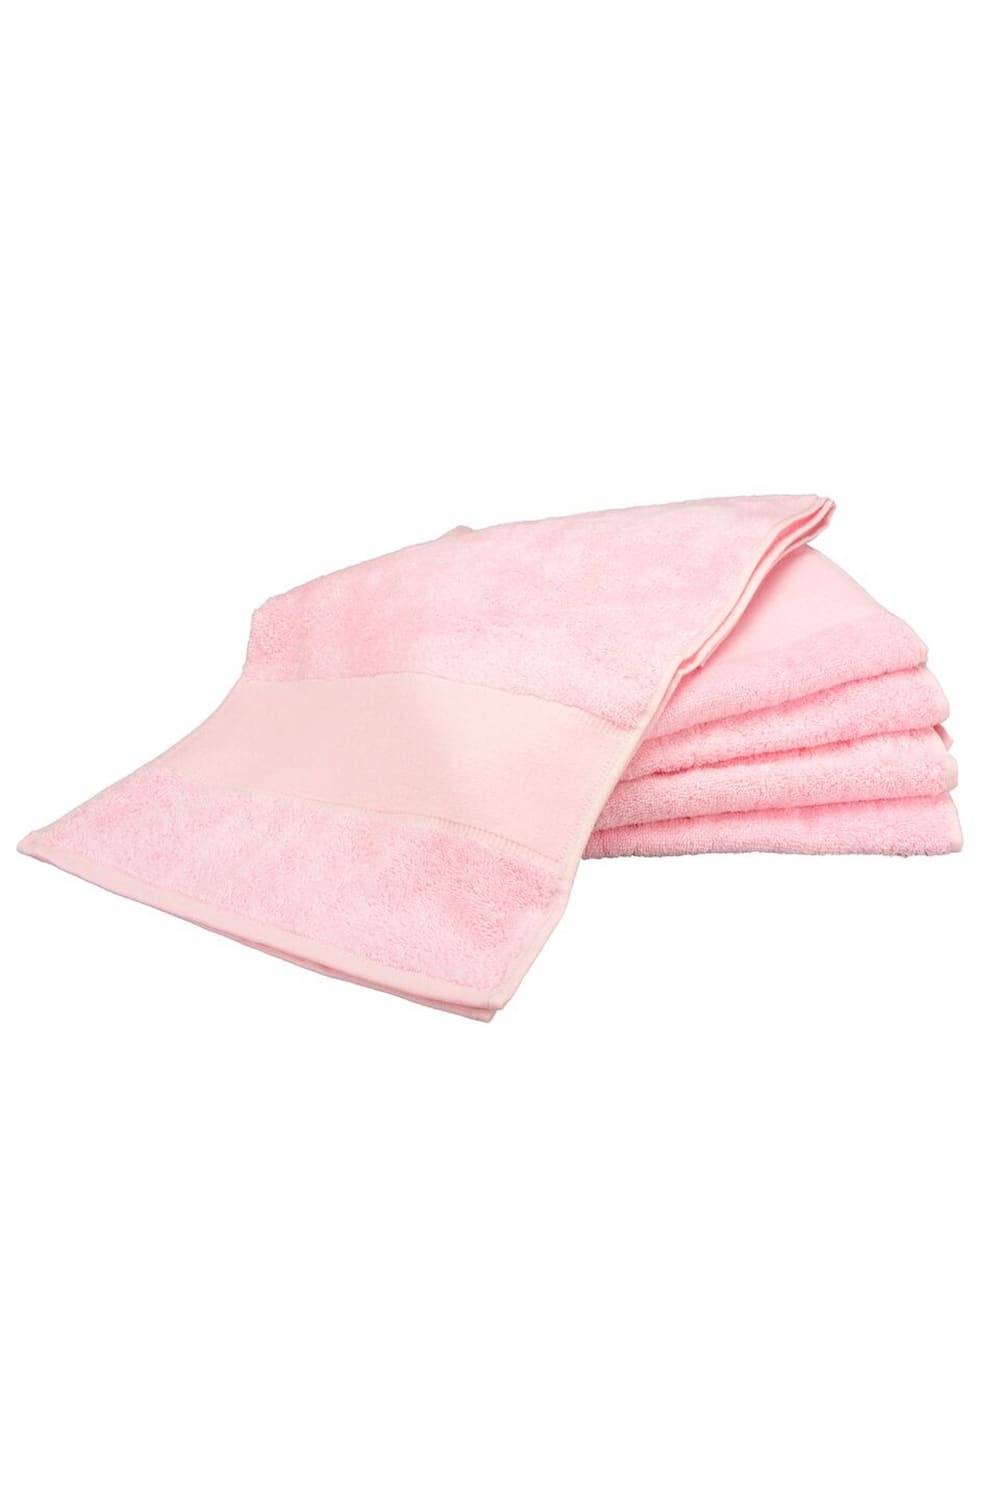 A&R Towels Print-Me Sport Towel (Light Pink) (One Size)